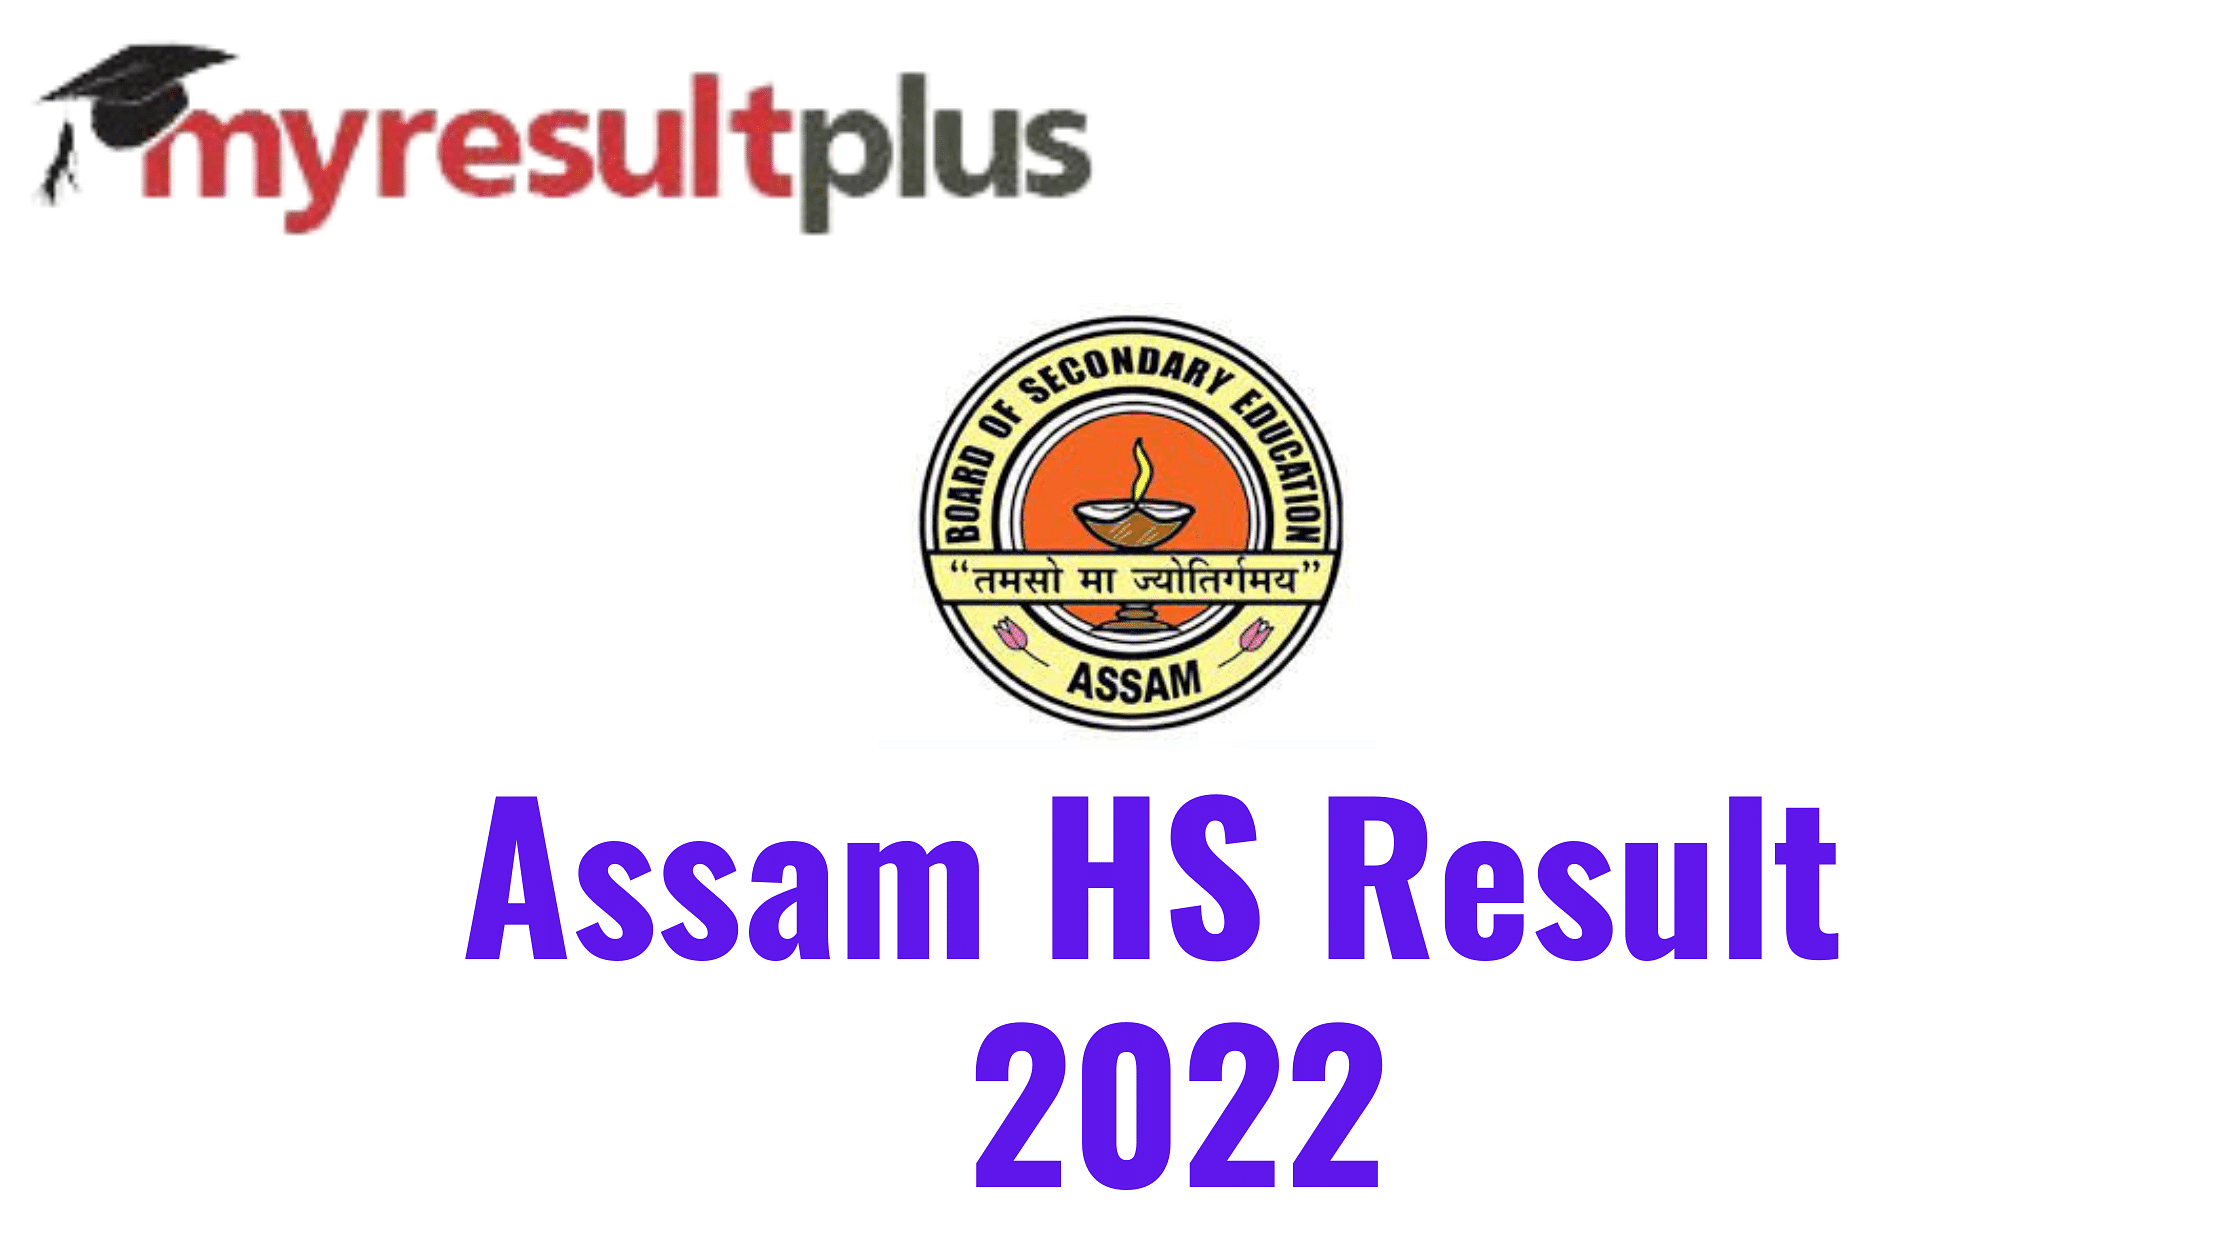 Assam HS Result 2022: Class 12 Results Declared, Check Scorecard and Pass Percentage Here